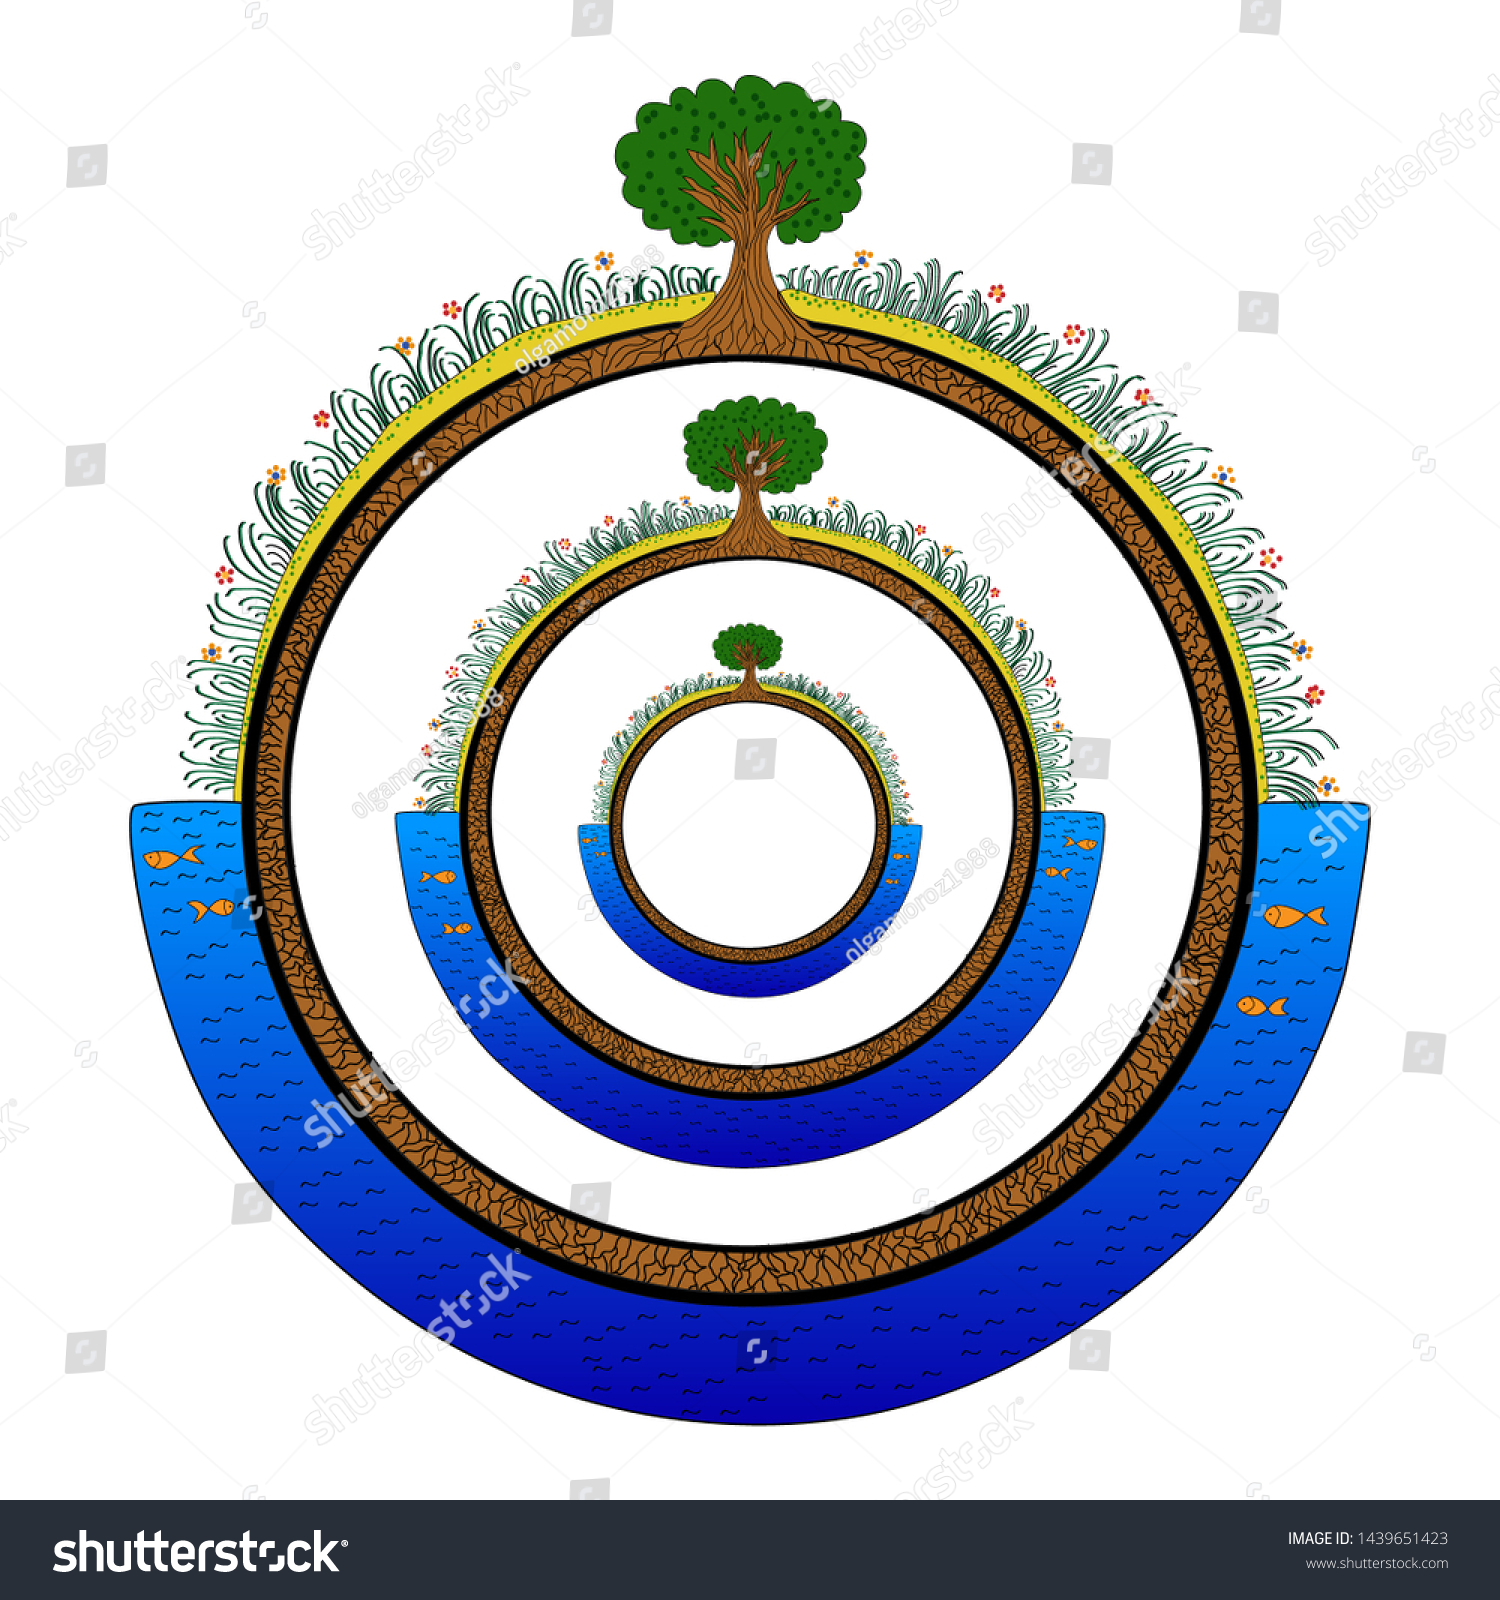 Download Nature Circle Tree Grass Water Fishes Stock Vector Royalty Free 1439651423